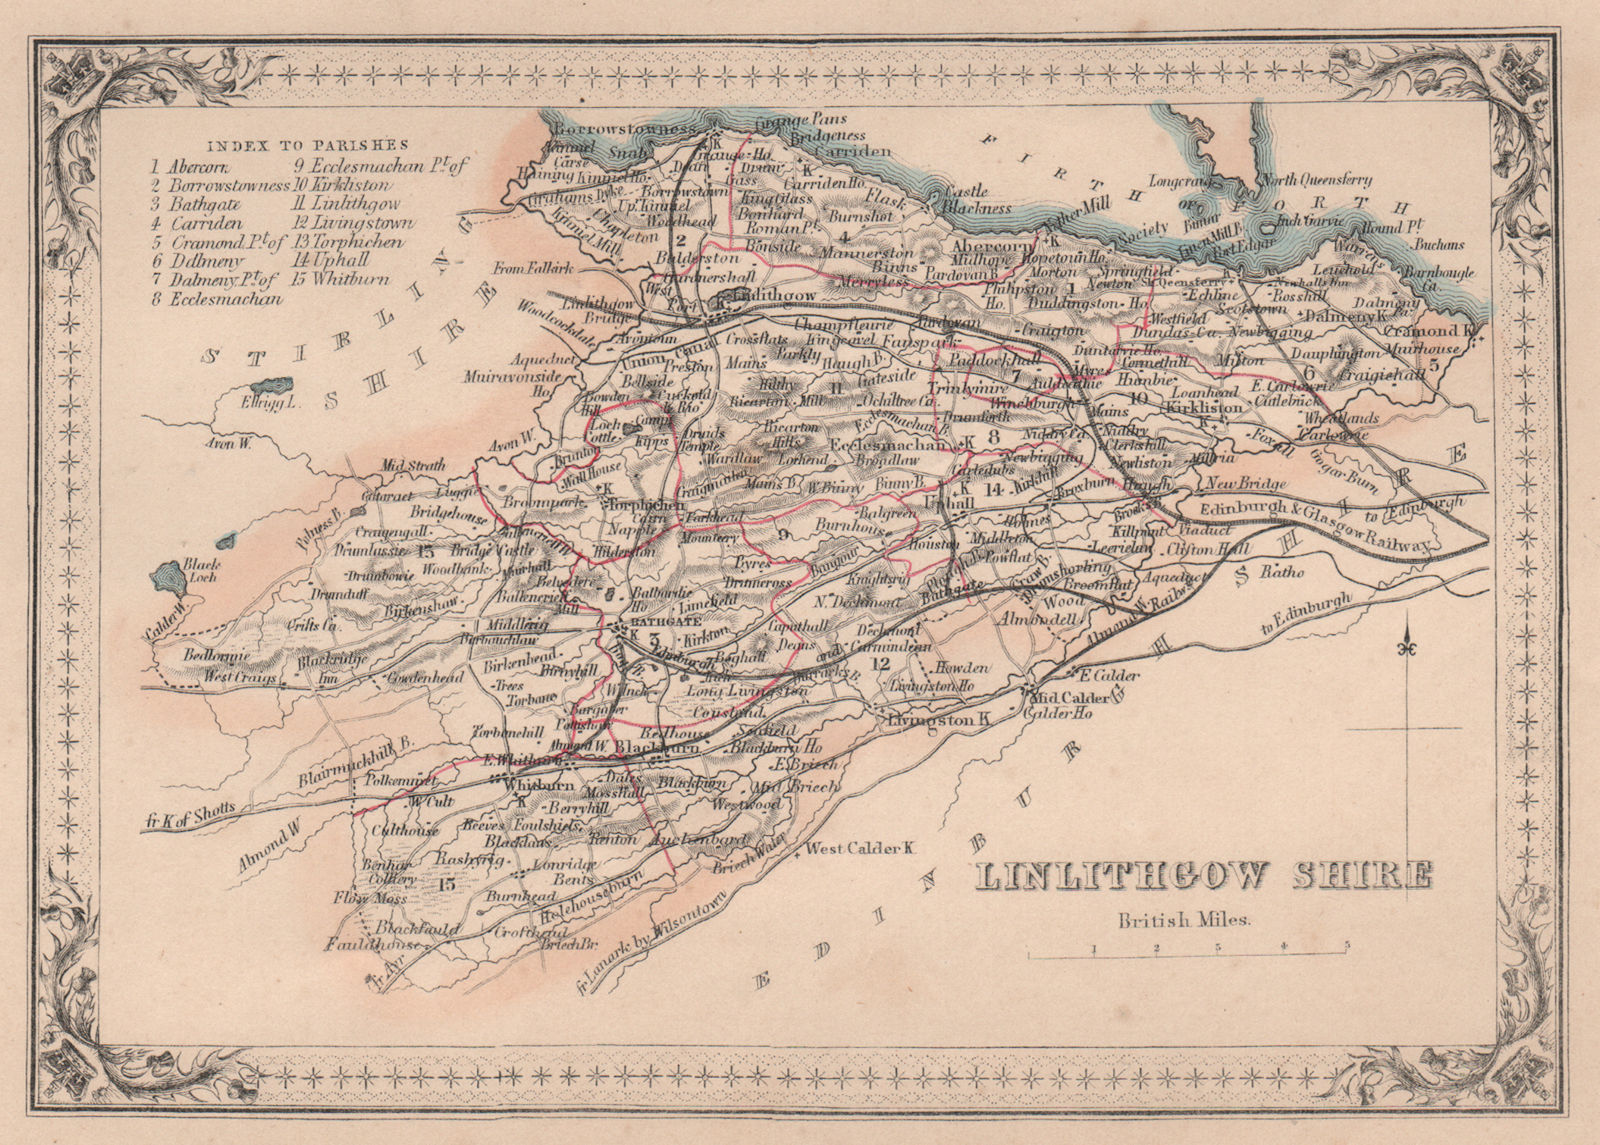 Associate Product Decorative antique county map of Linlithgowshire, Scotland. FULLARTON 1868